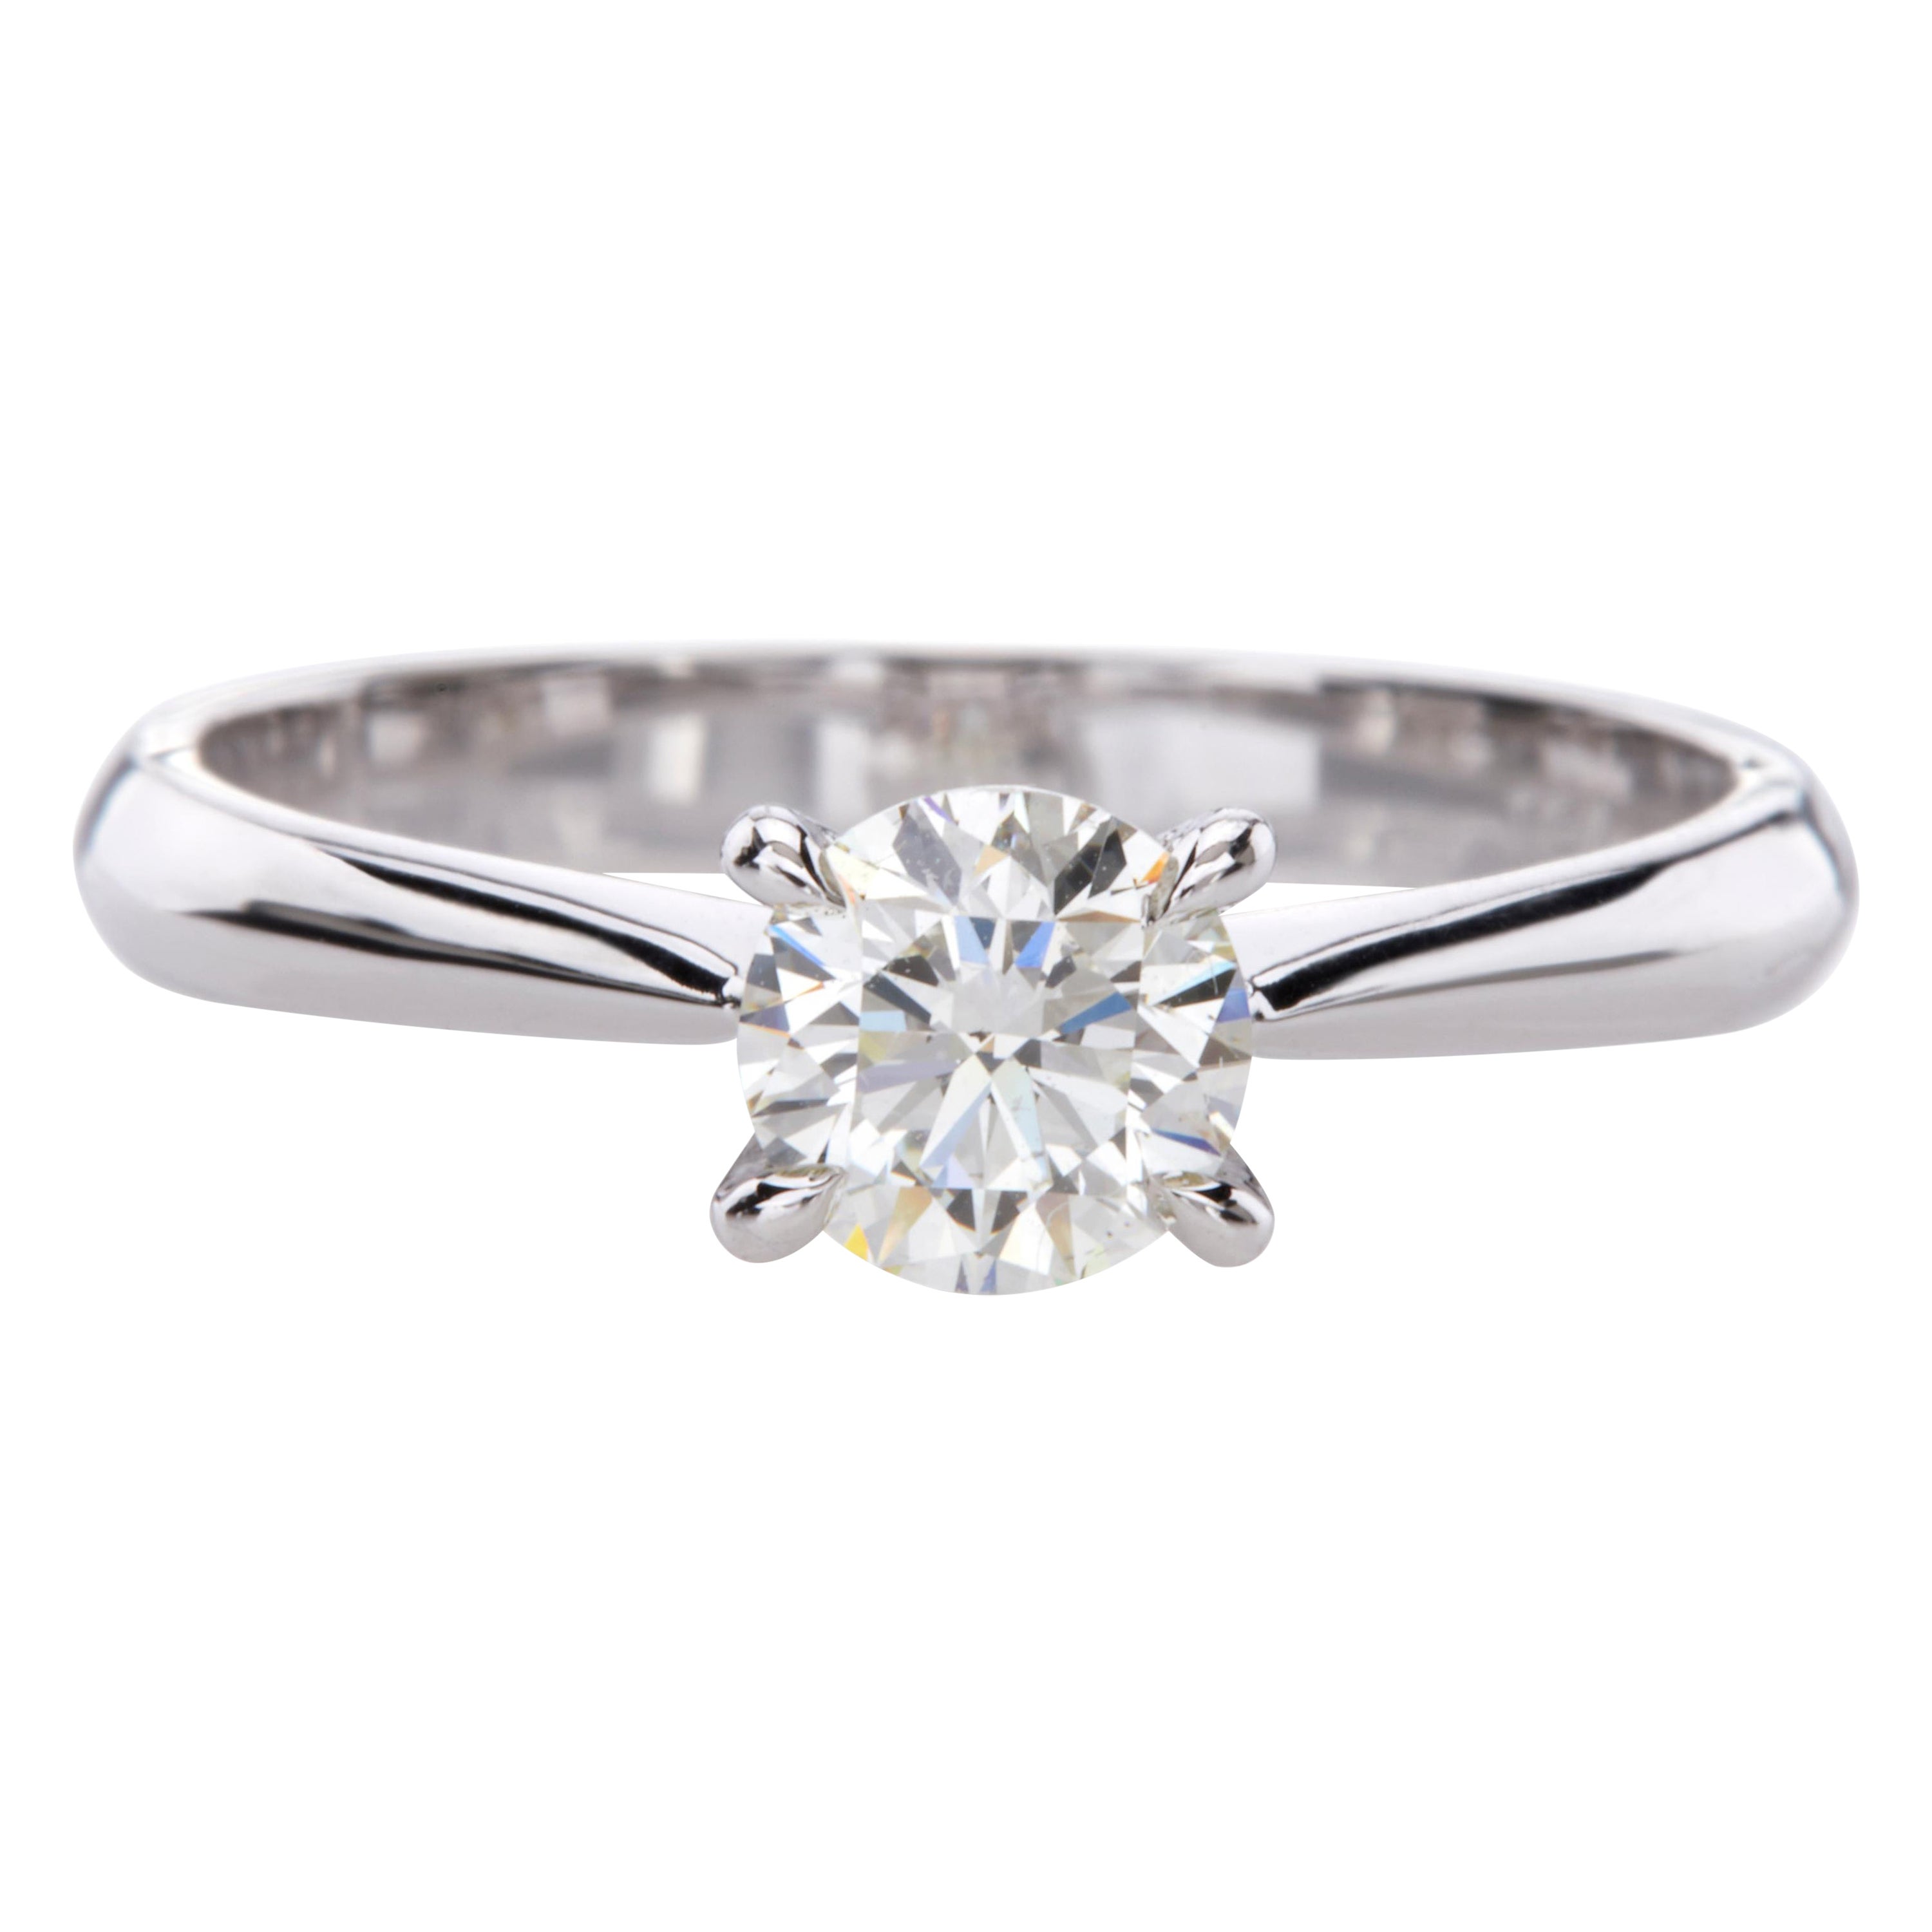 Solitaire Ring with GIA Certified 0.72ct Brilliant Cut Diamond 18Kt White Gold